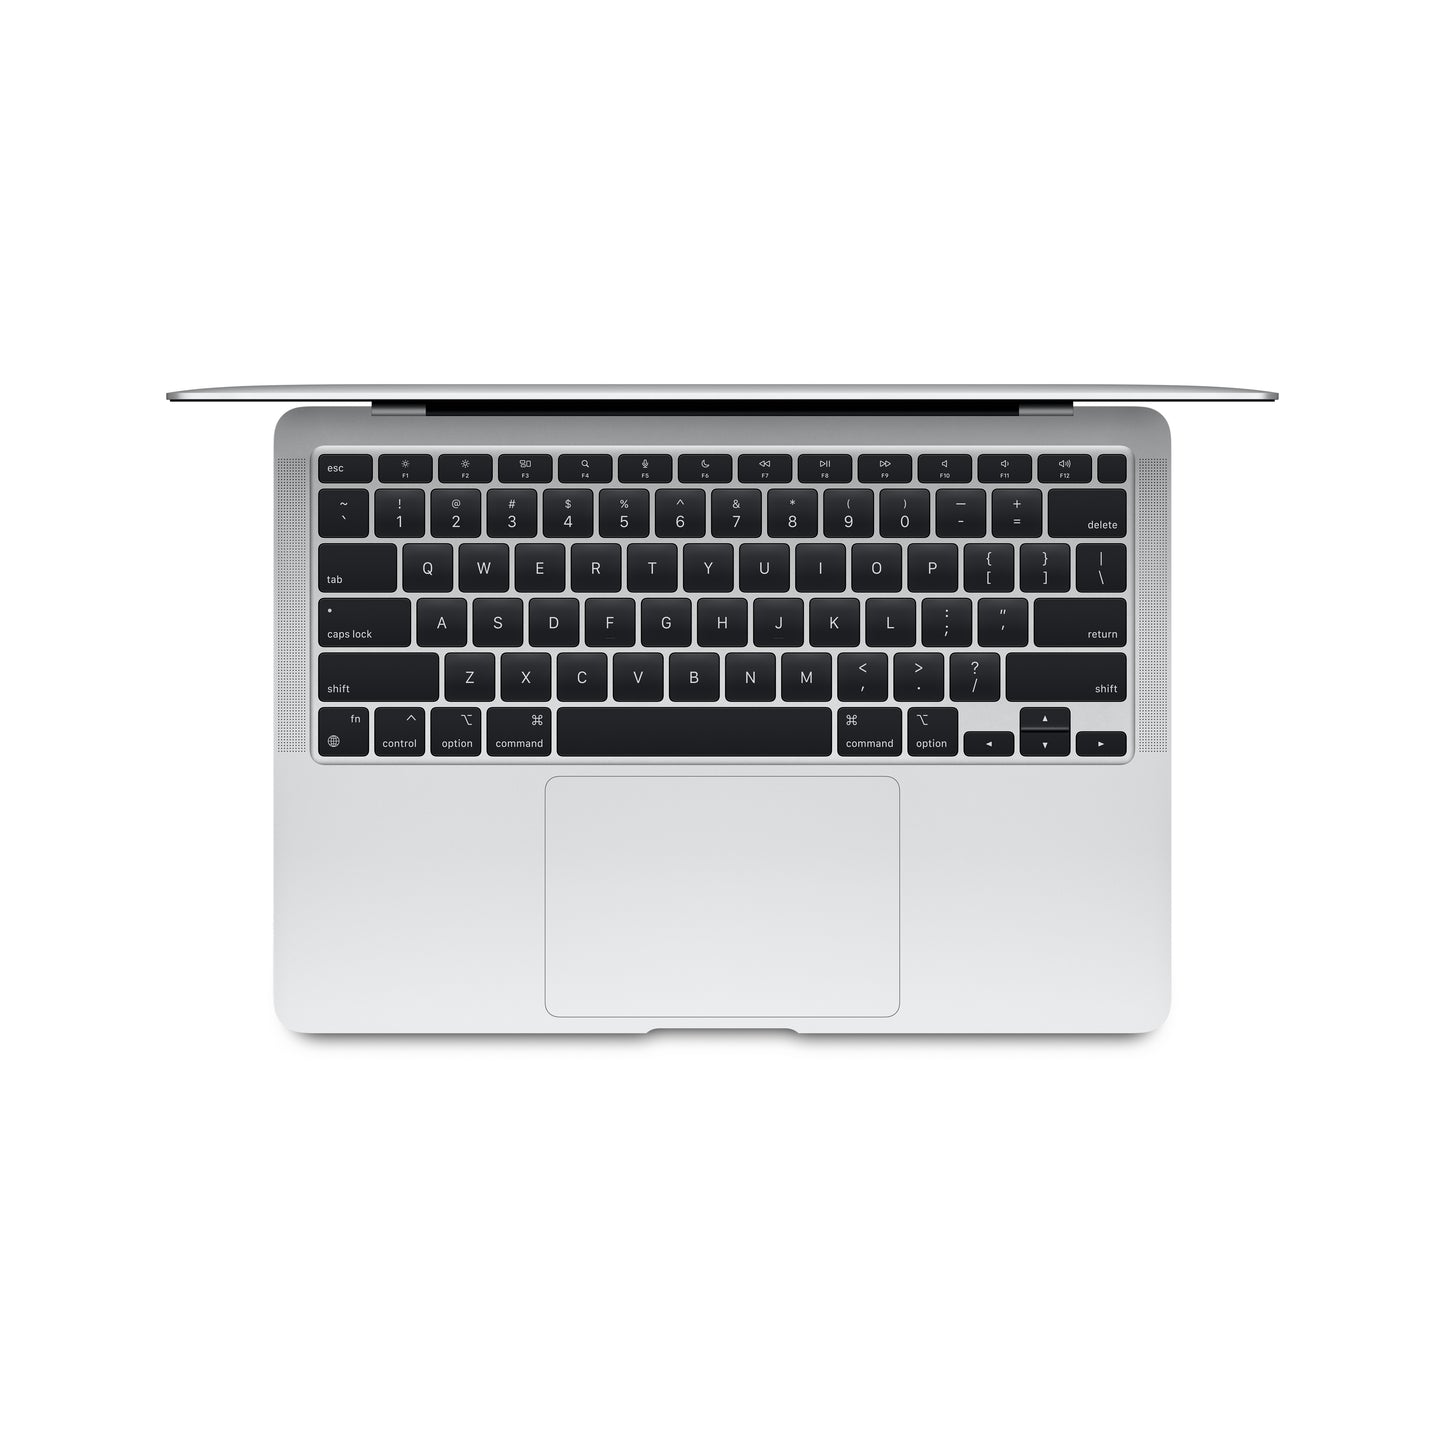 Apple MacBook Air with M1 Chip